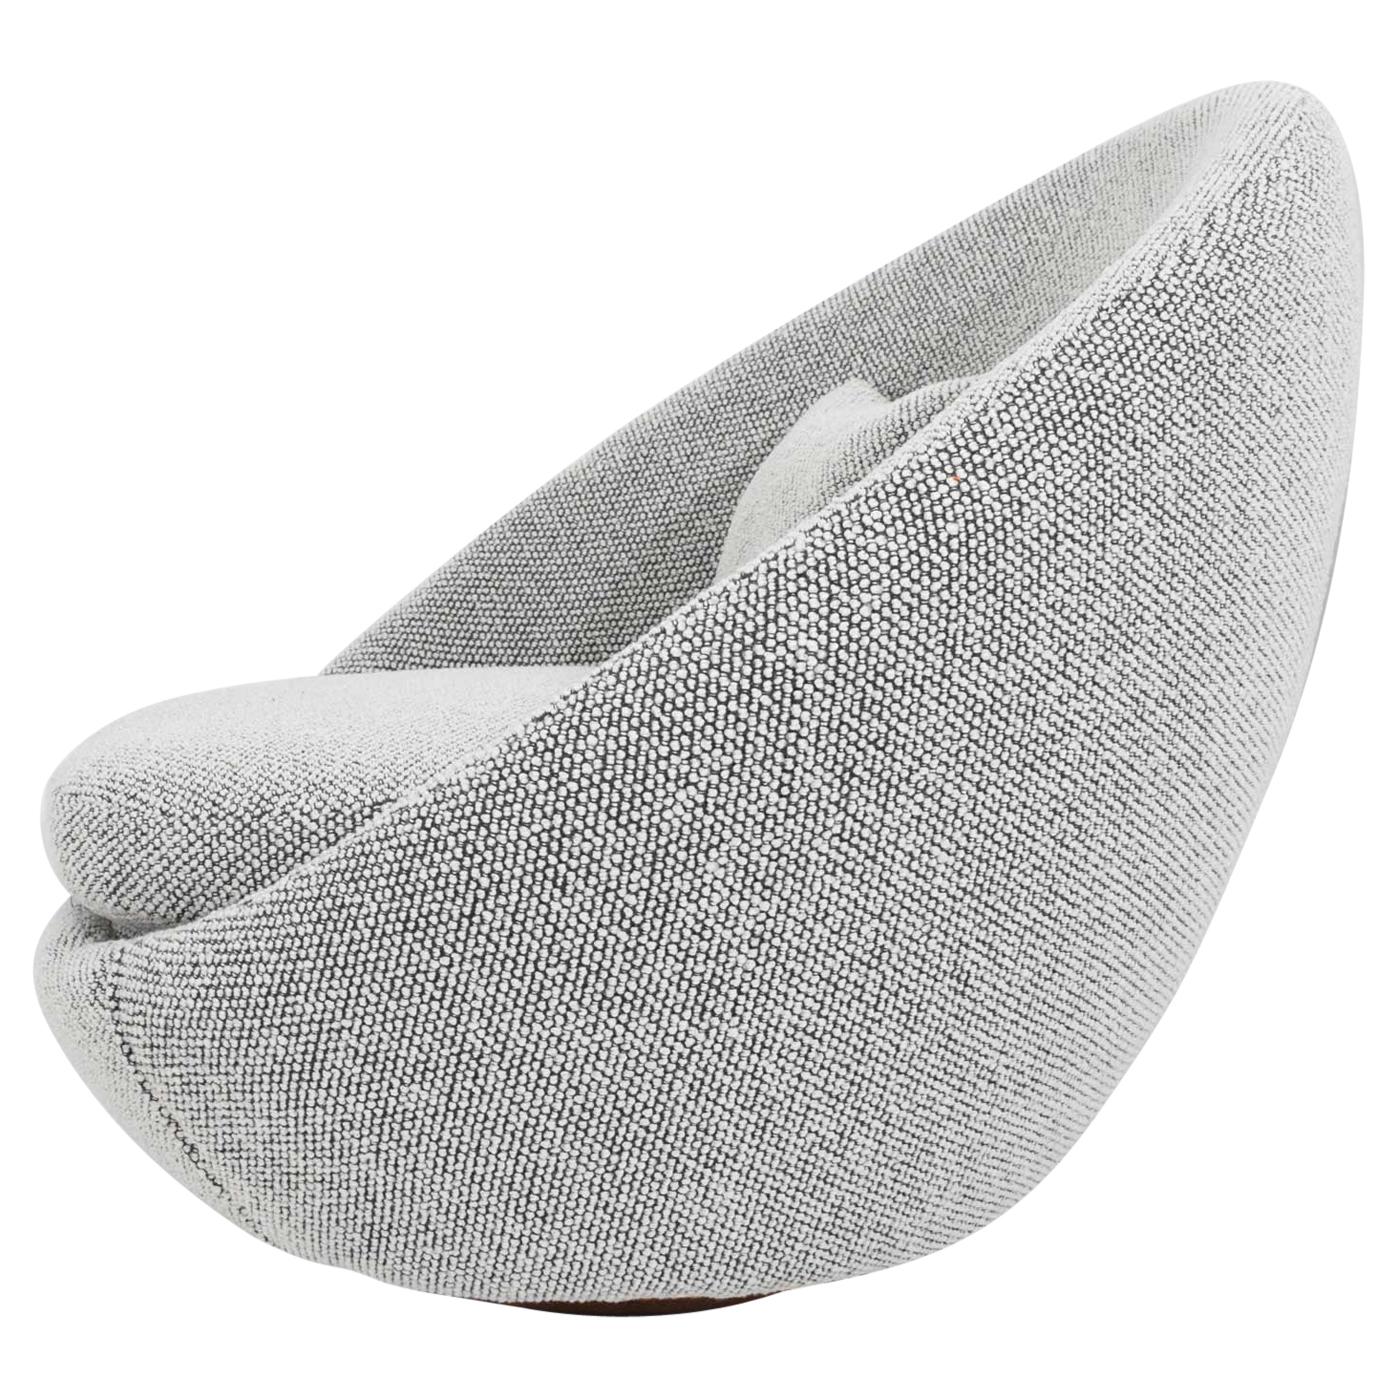 Milo Baughman Egg Swivel Chair in Black and White Nubby Upholstery